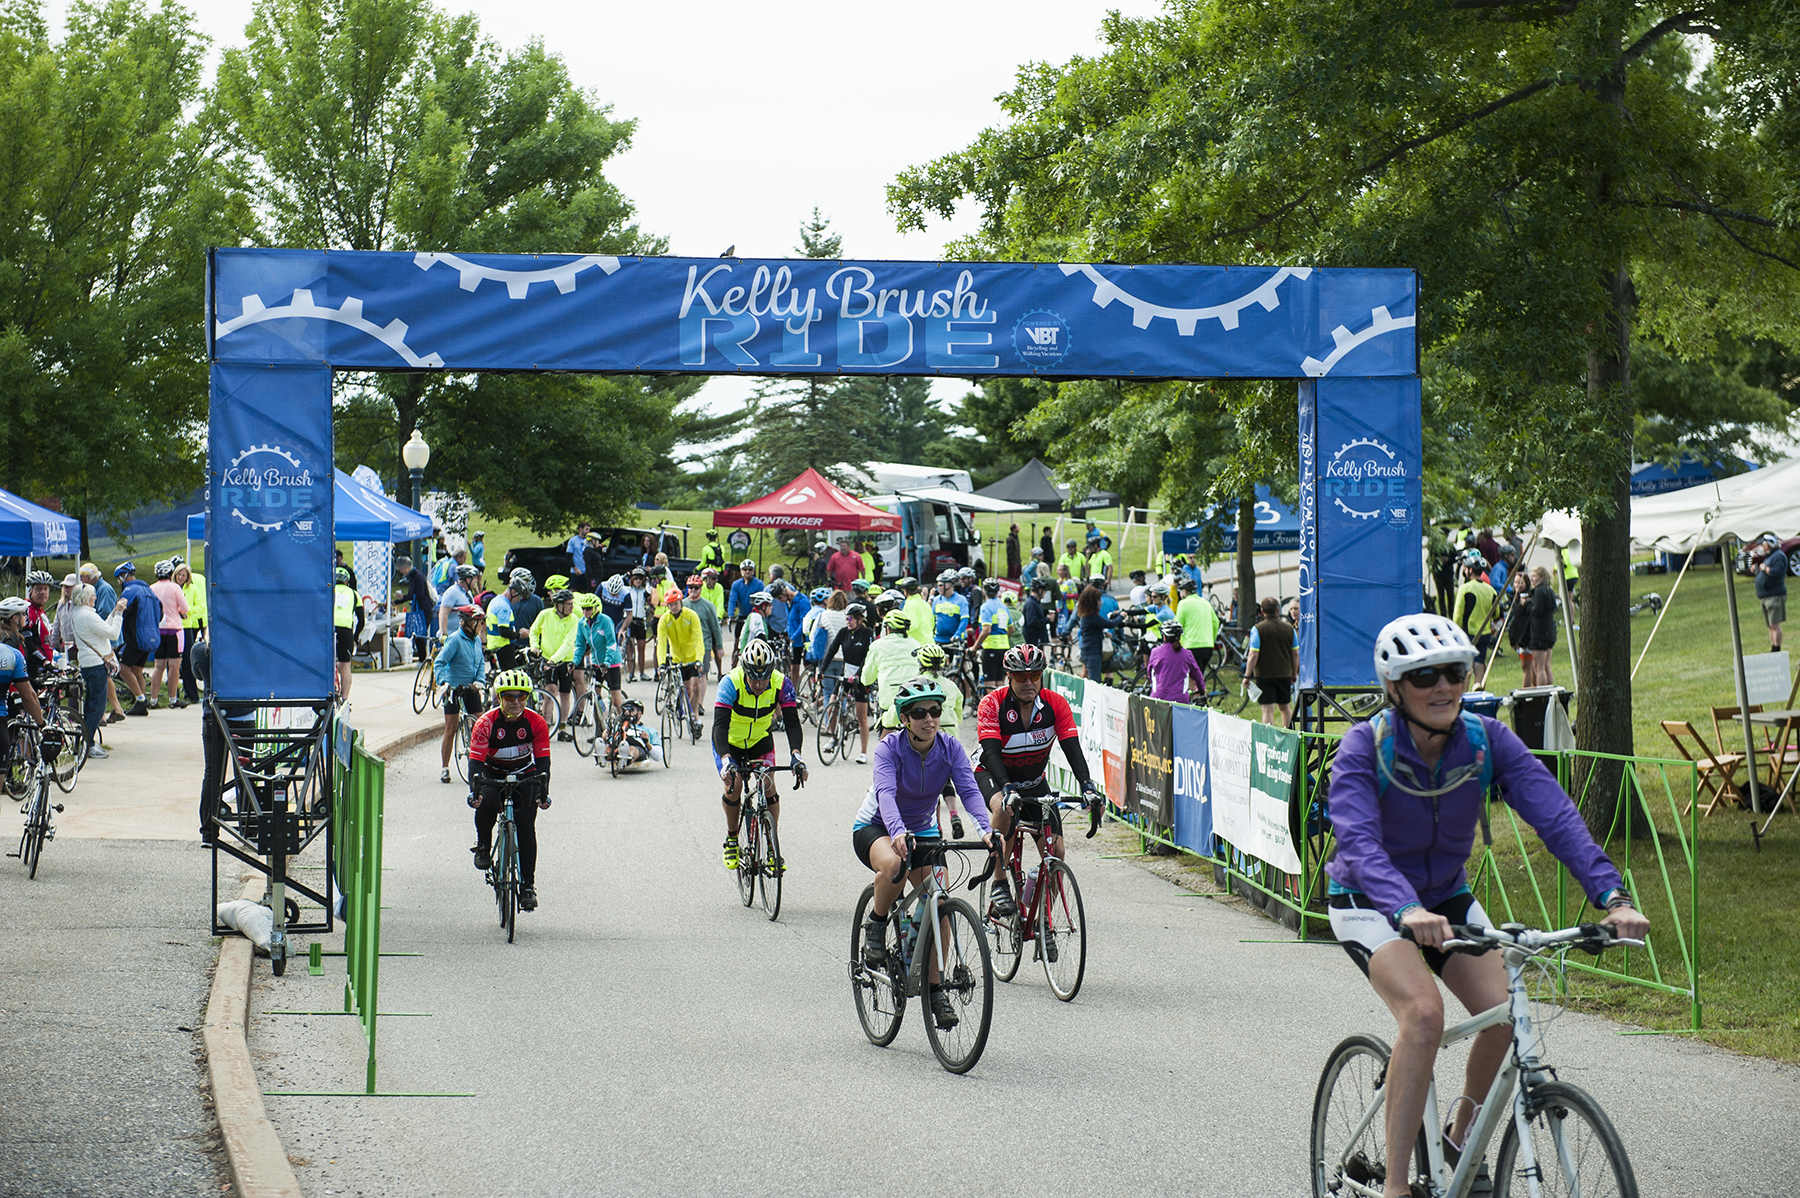 Cyclists rolling in the 13th Annual Kelly Brush Ride powered by VBT Bicycling and Walking Vacations on Saturday, Sept. 8, 2018. The annual ride which starts and finishes in Middlebury, Vermont, and wi